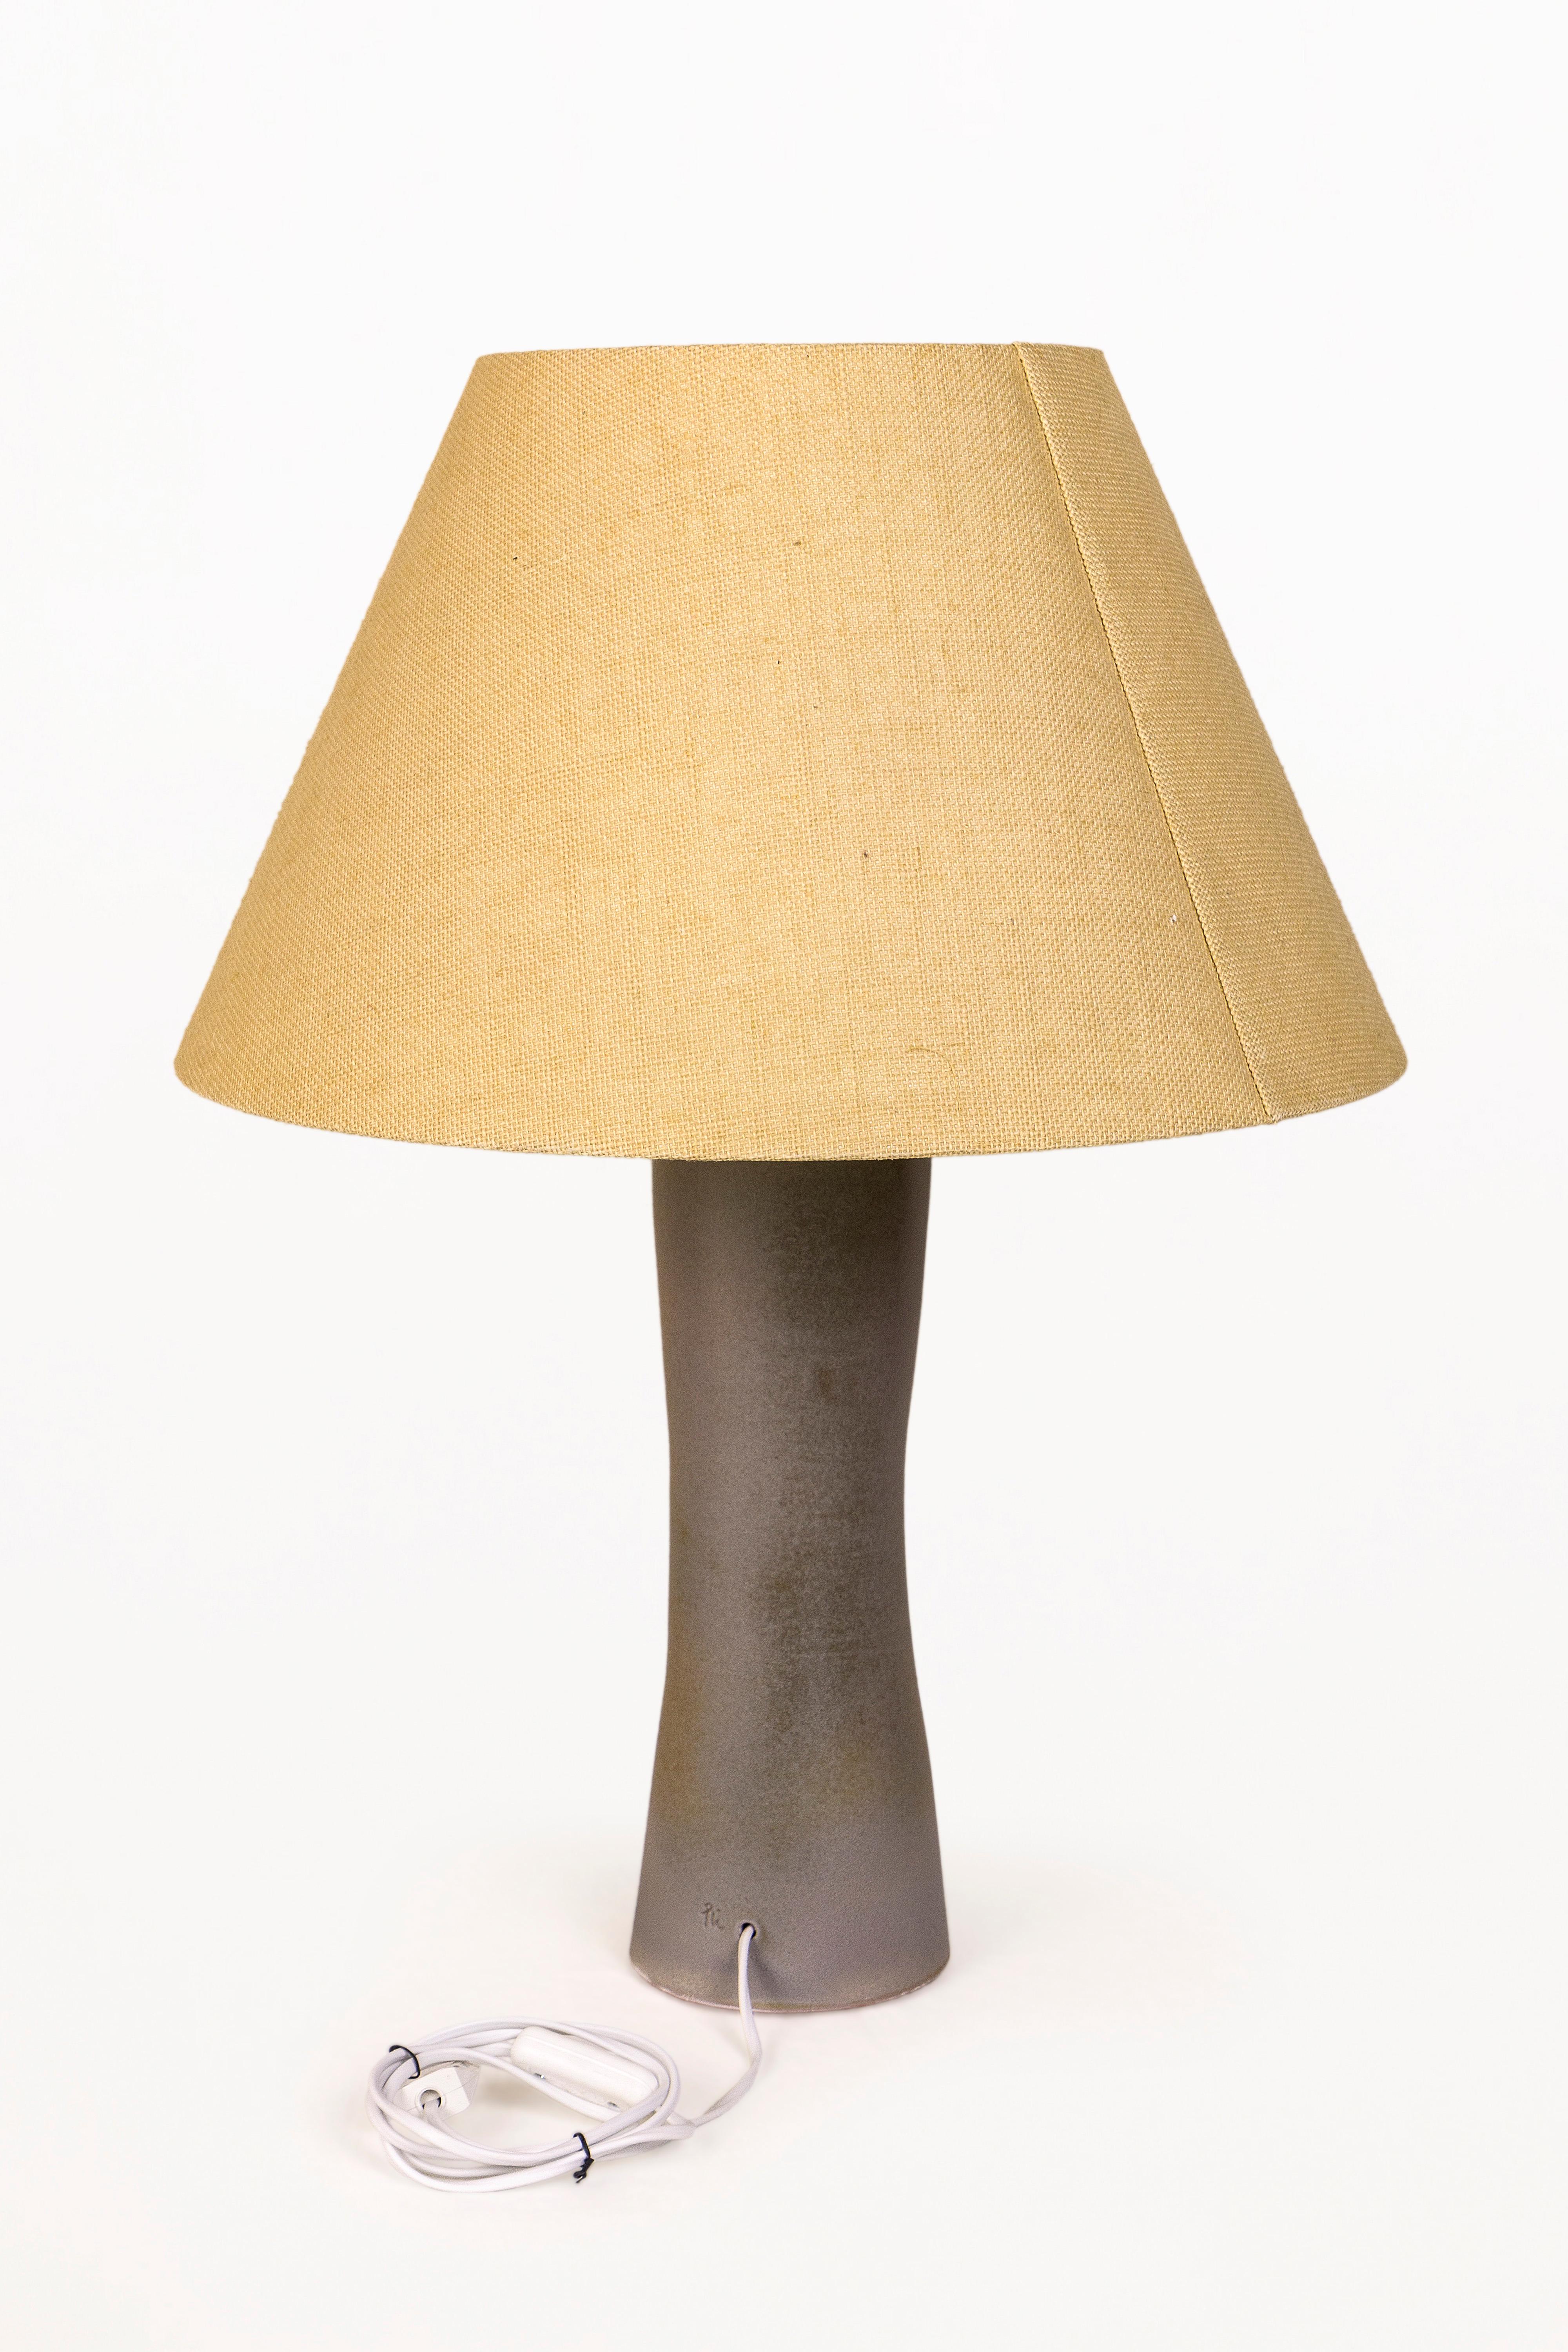 Modern Pair of Serge Castella Ceramic Table Lamps for Paco Orti, 2019, France